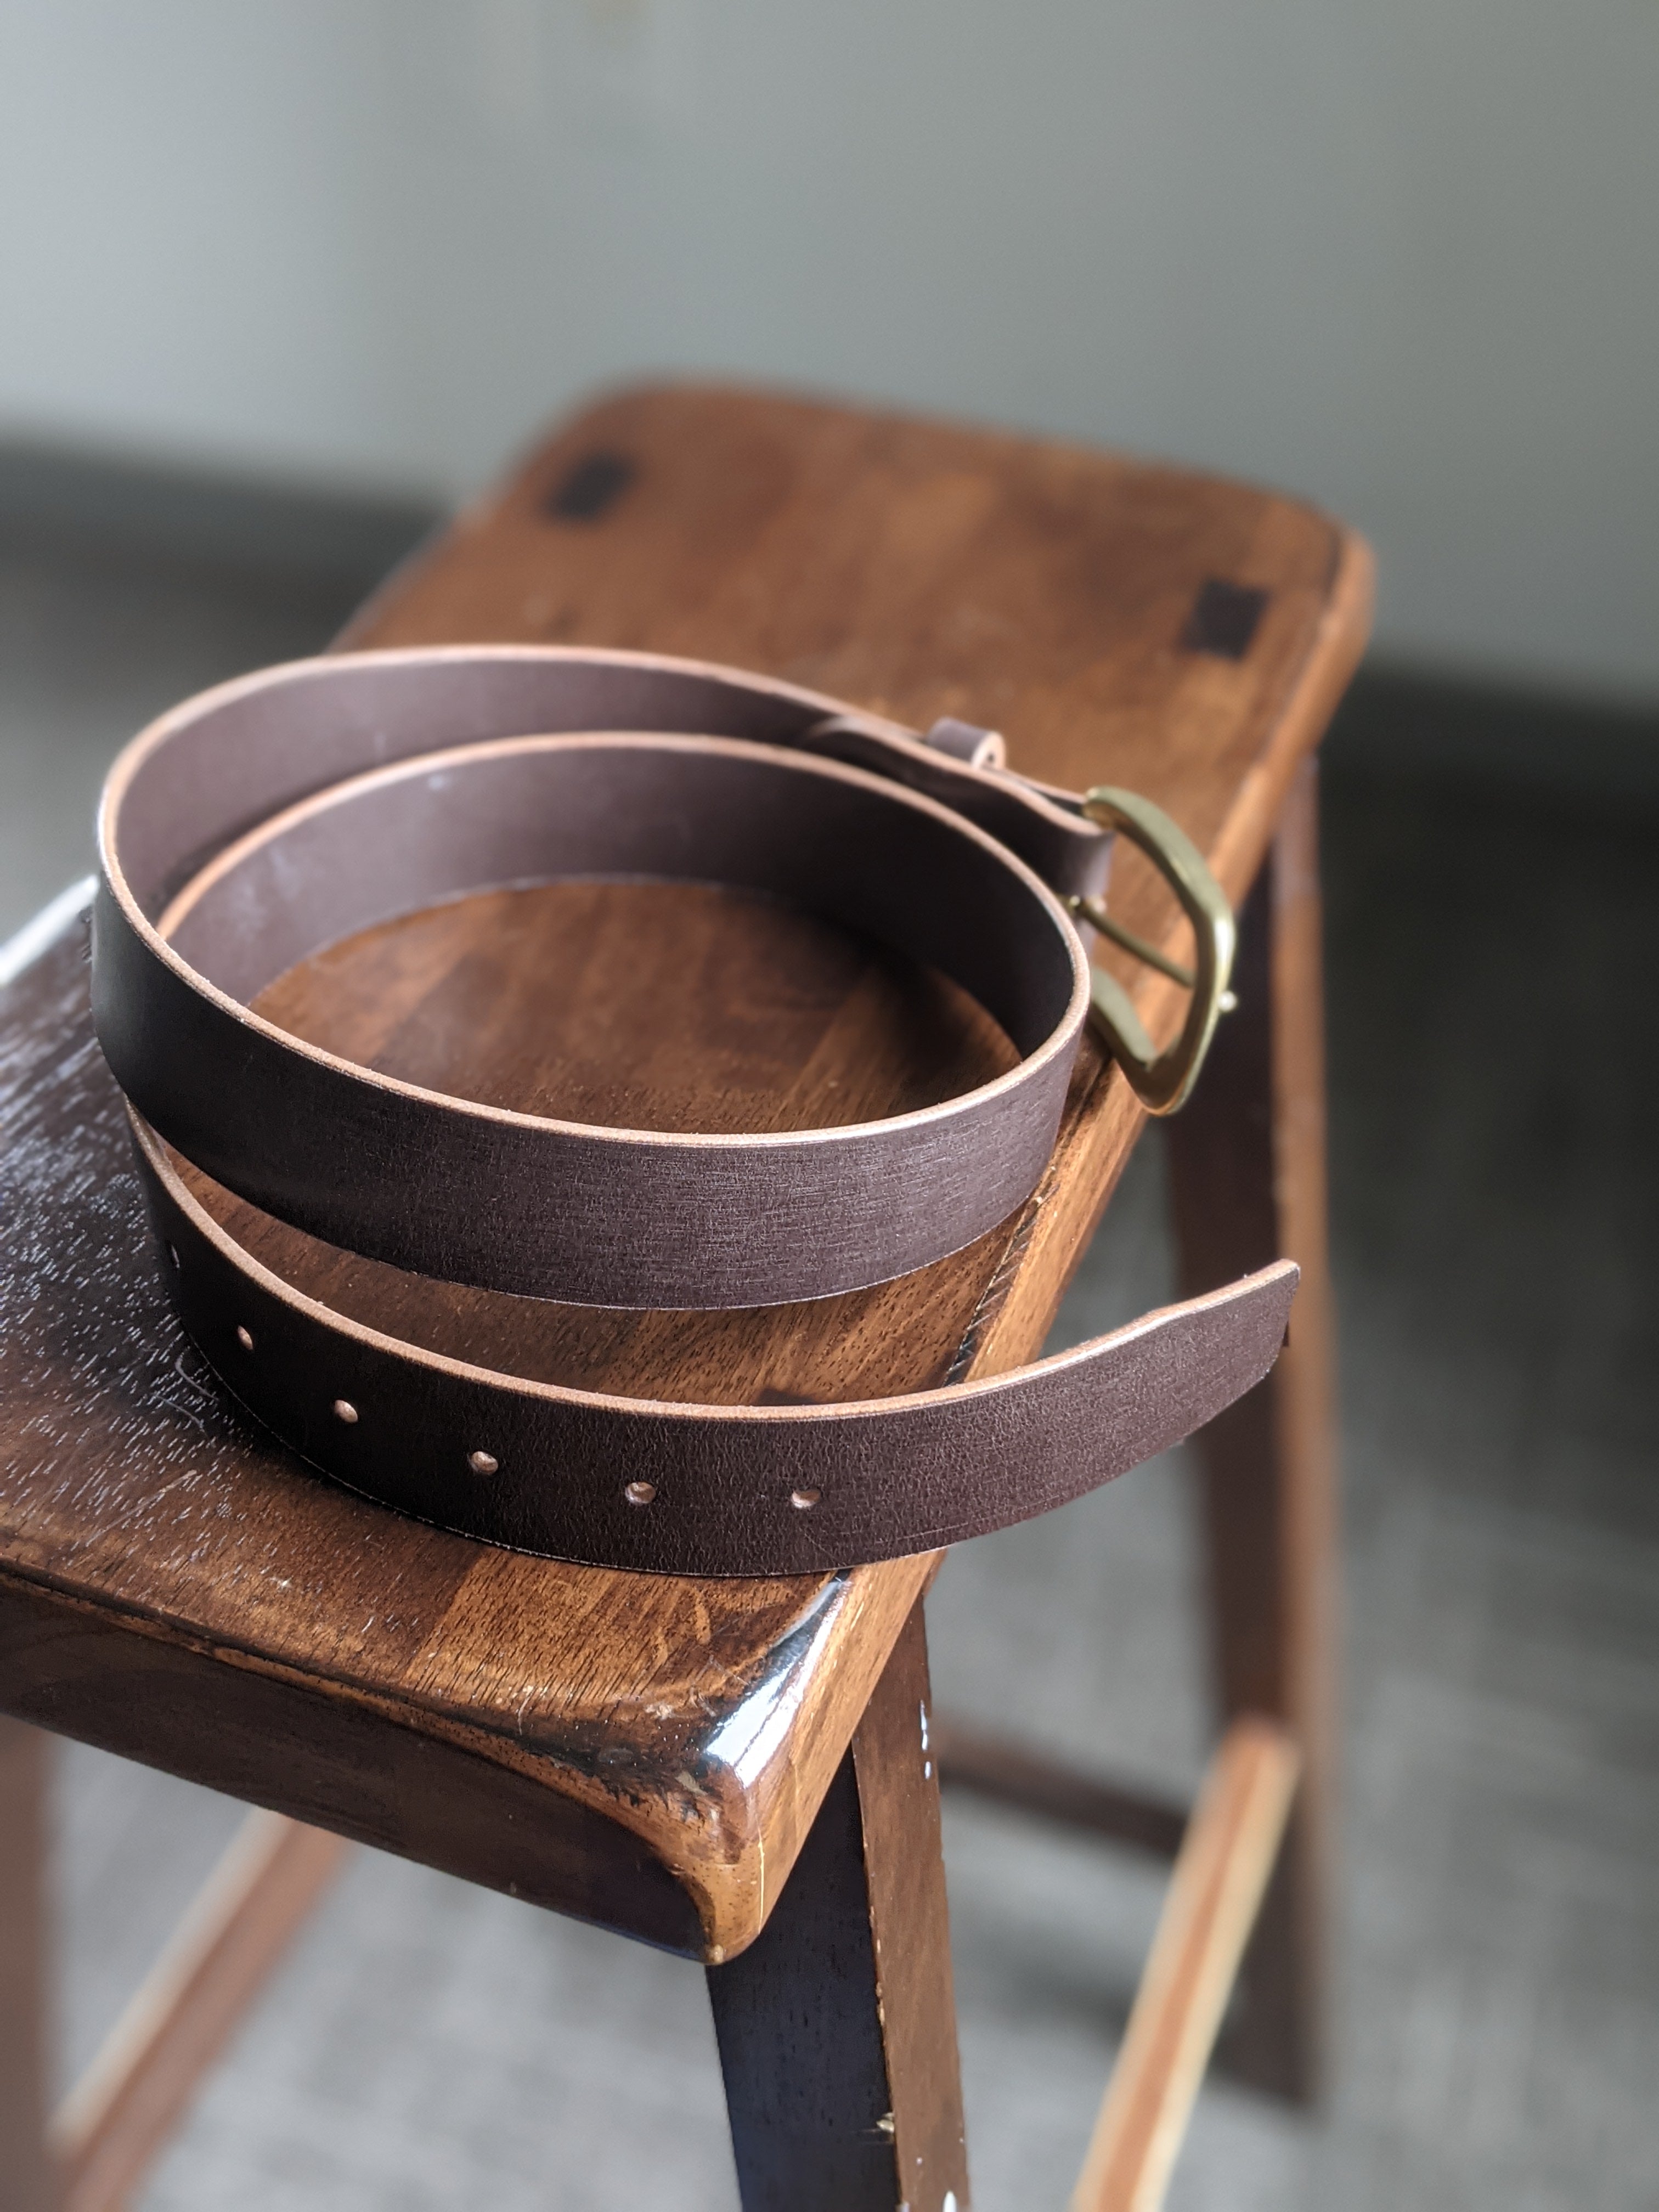 Men's leather belt, handcrafted by modjūl studio in Canada using premium leather and quality hardware.